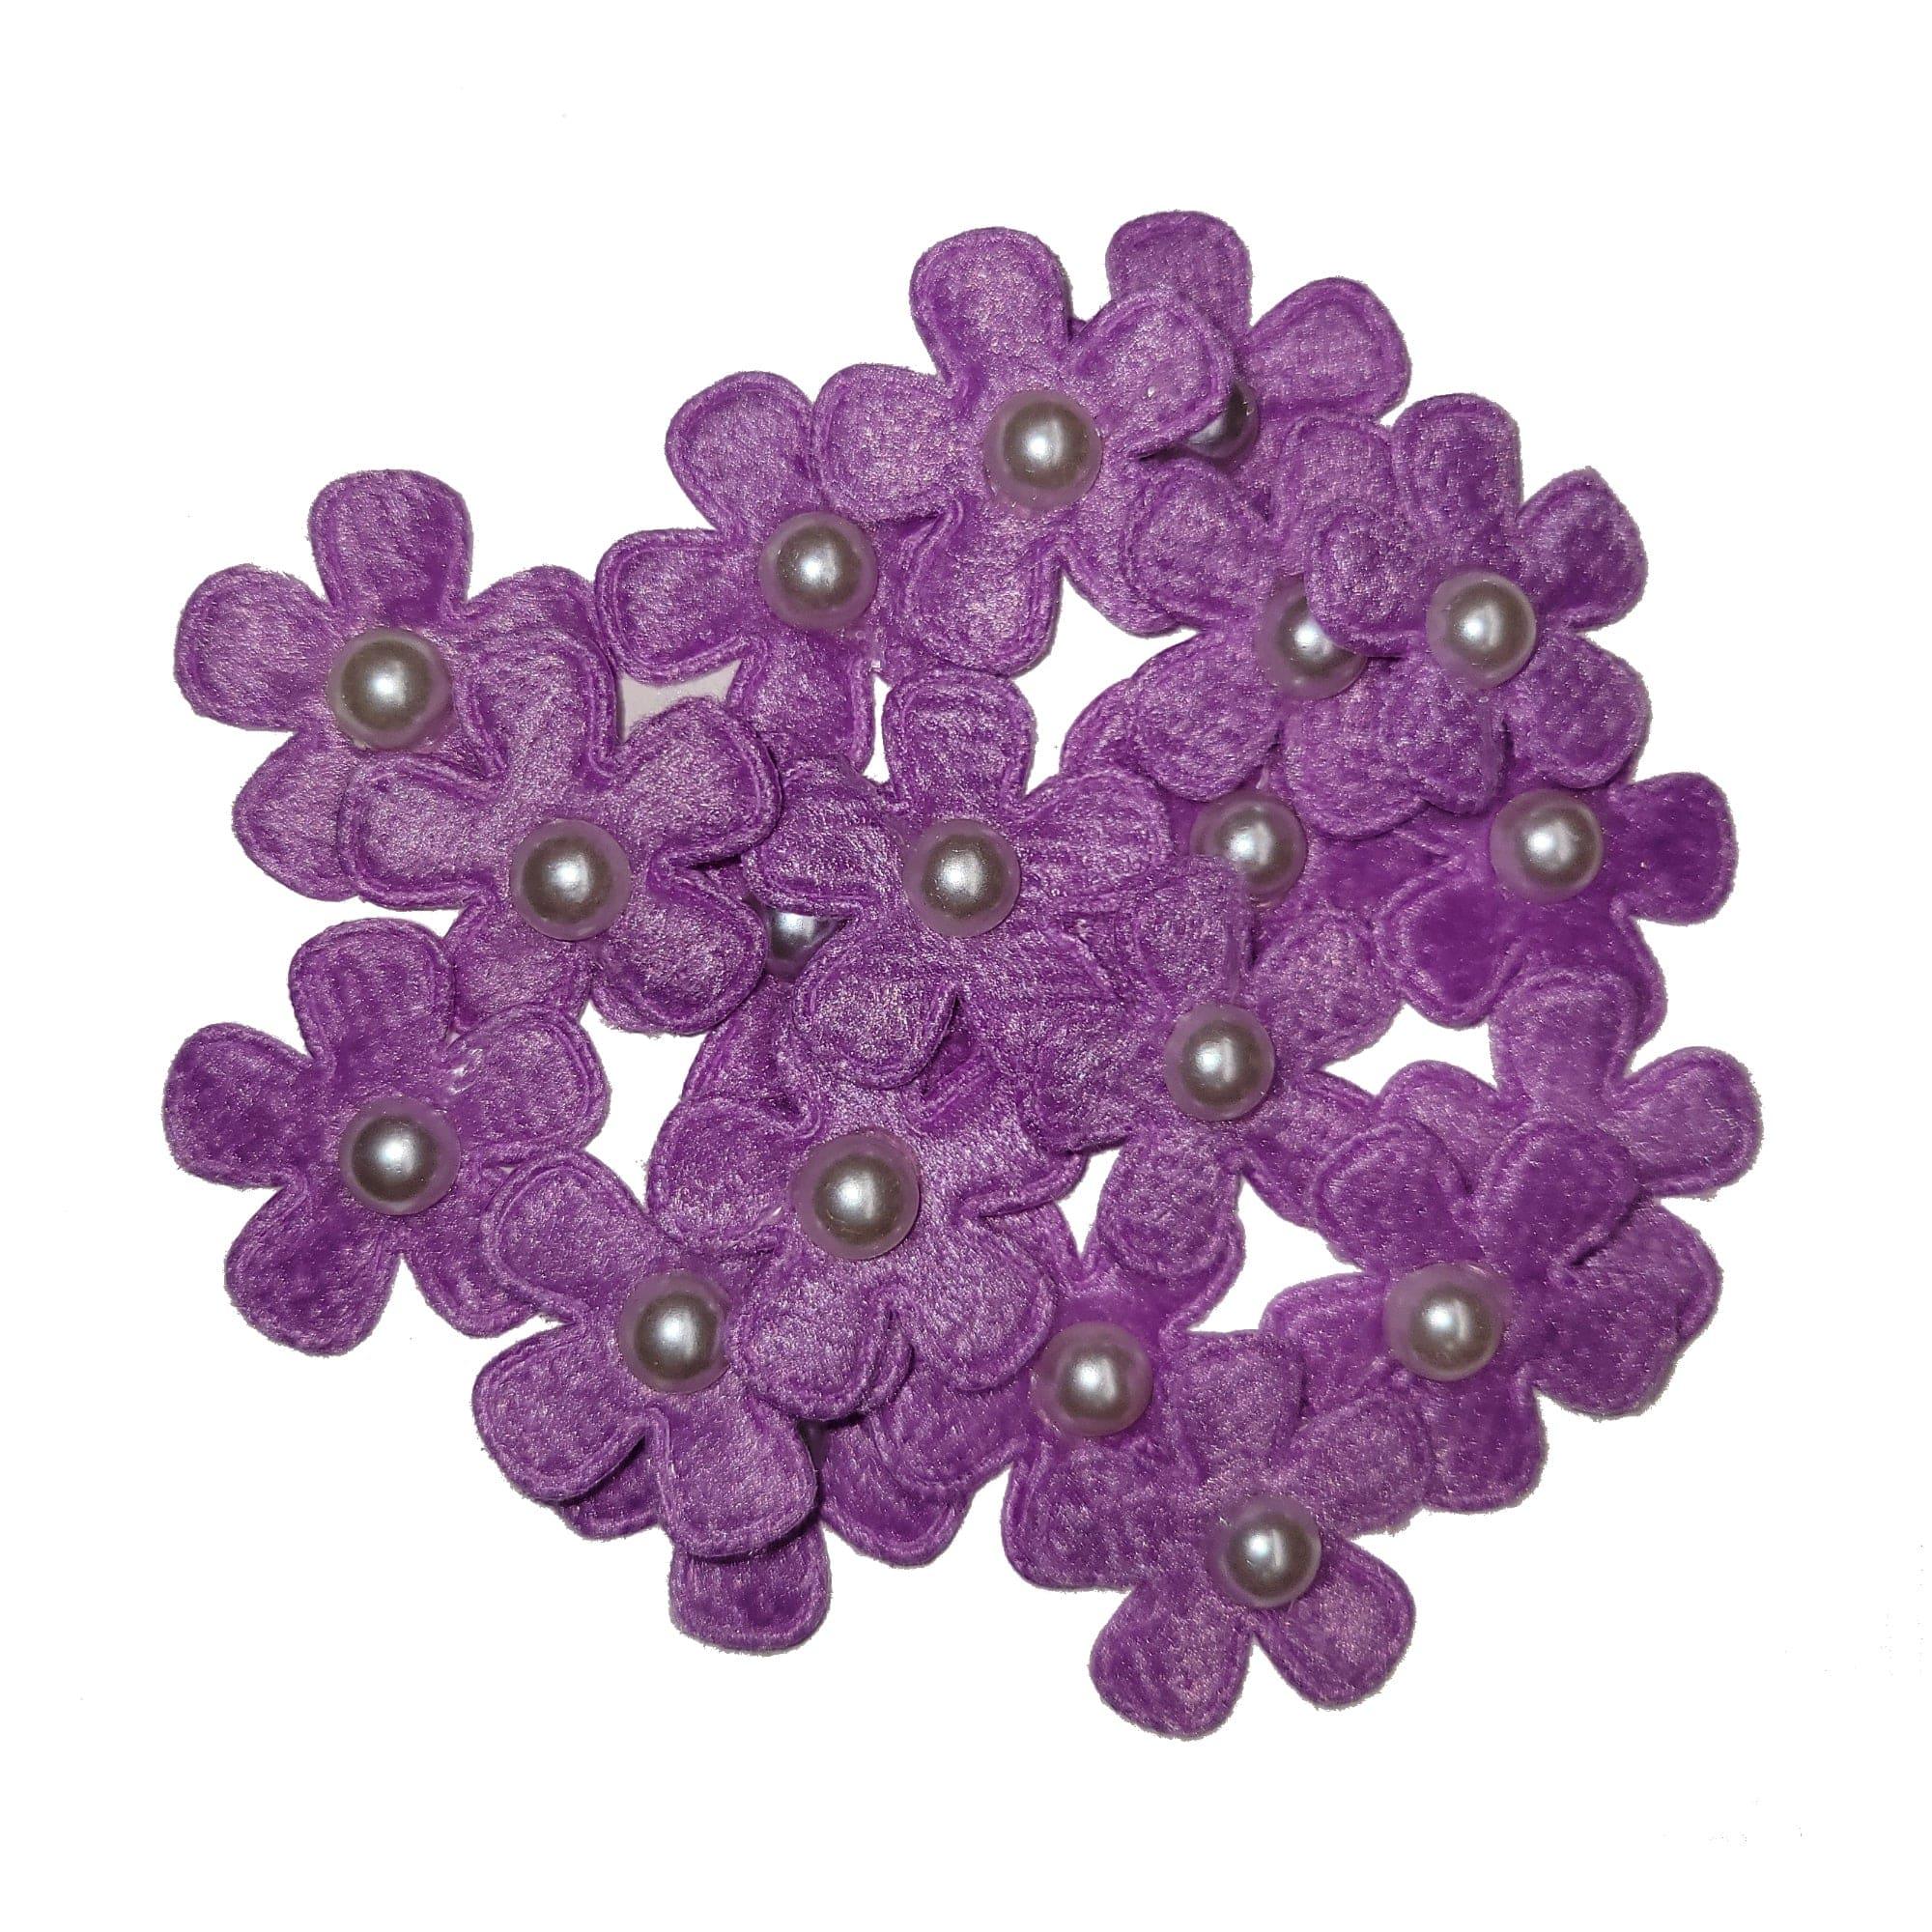 Pearl Petals Collection purple" Fabric Flowers with Pearl - Pkg. of 20